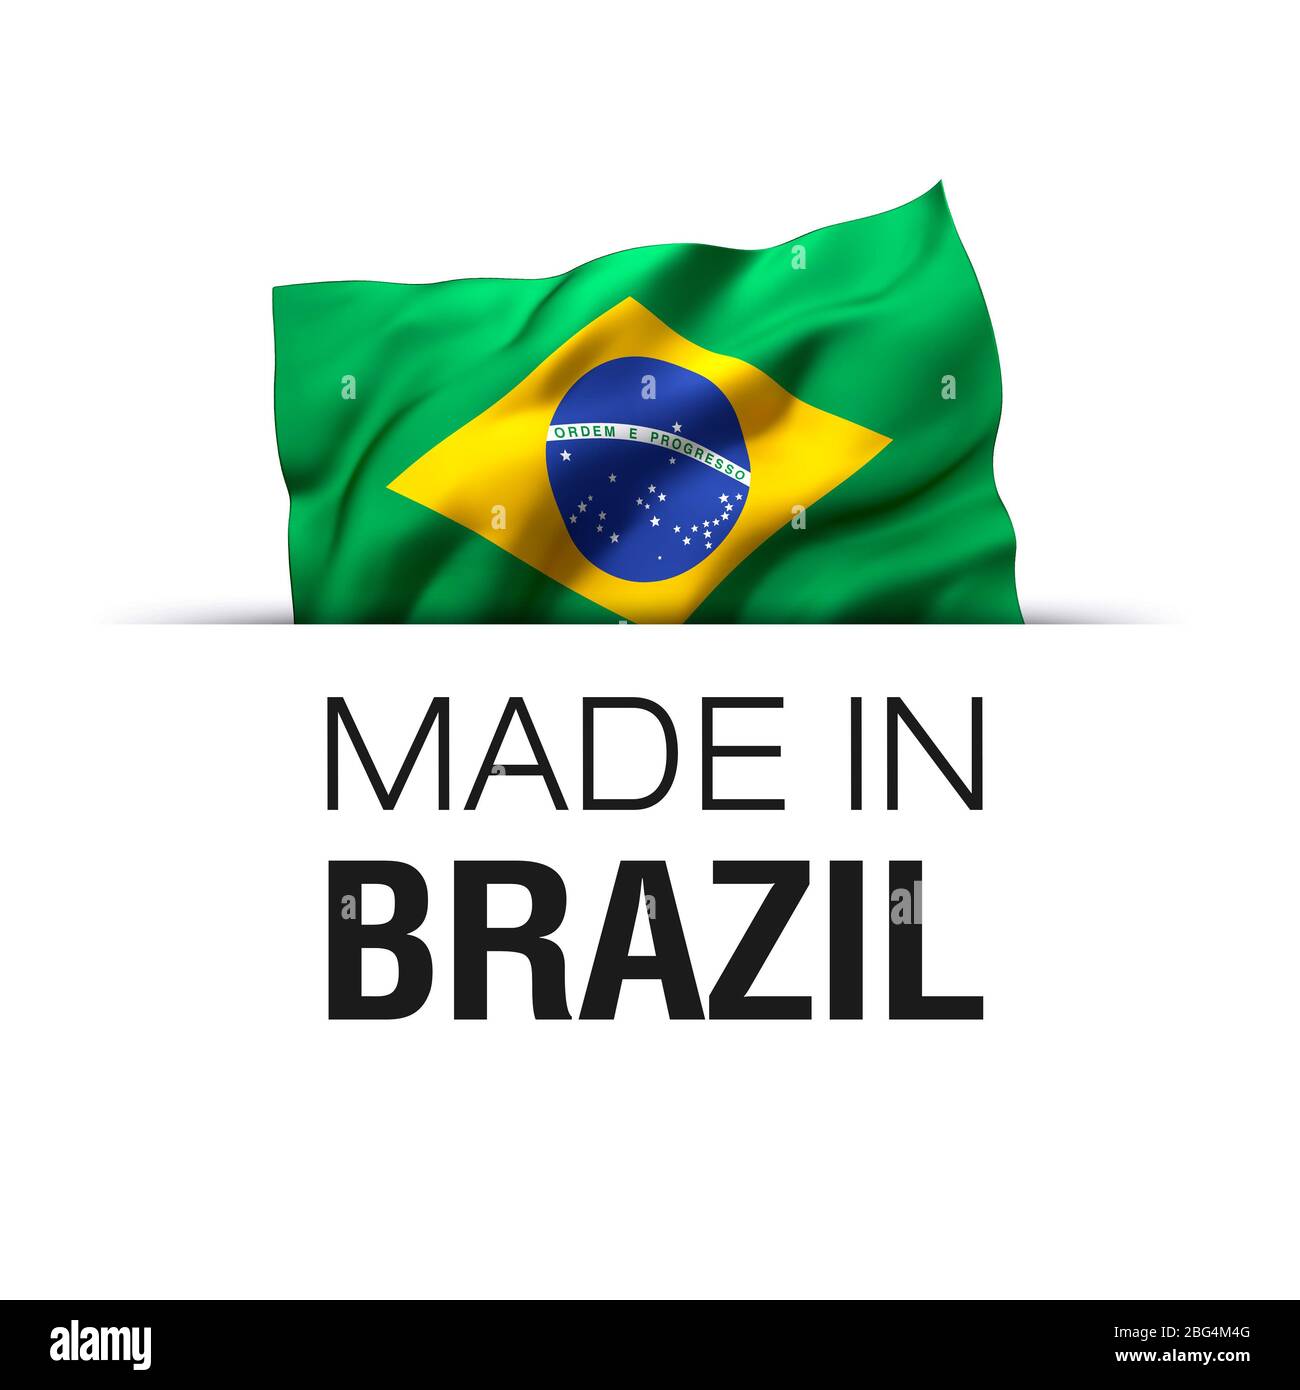 Made in Brazil - Guarantee label with a waving Brazilian flag. Stock Photo